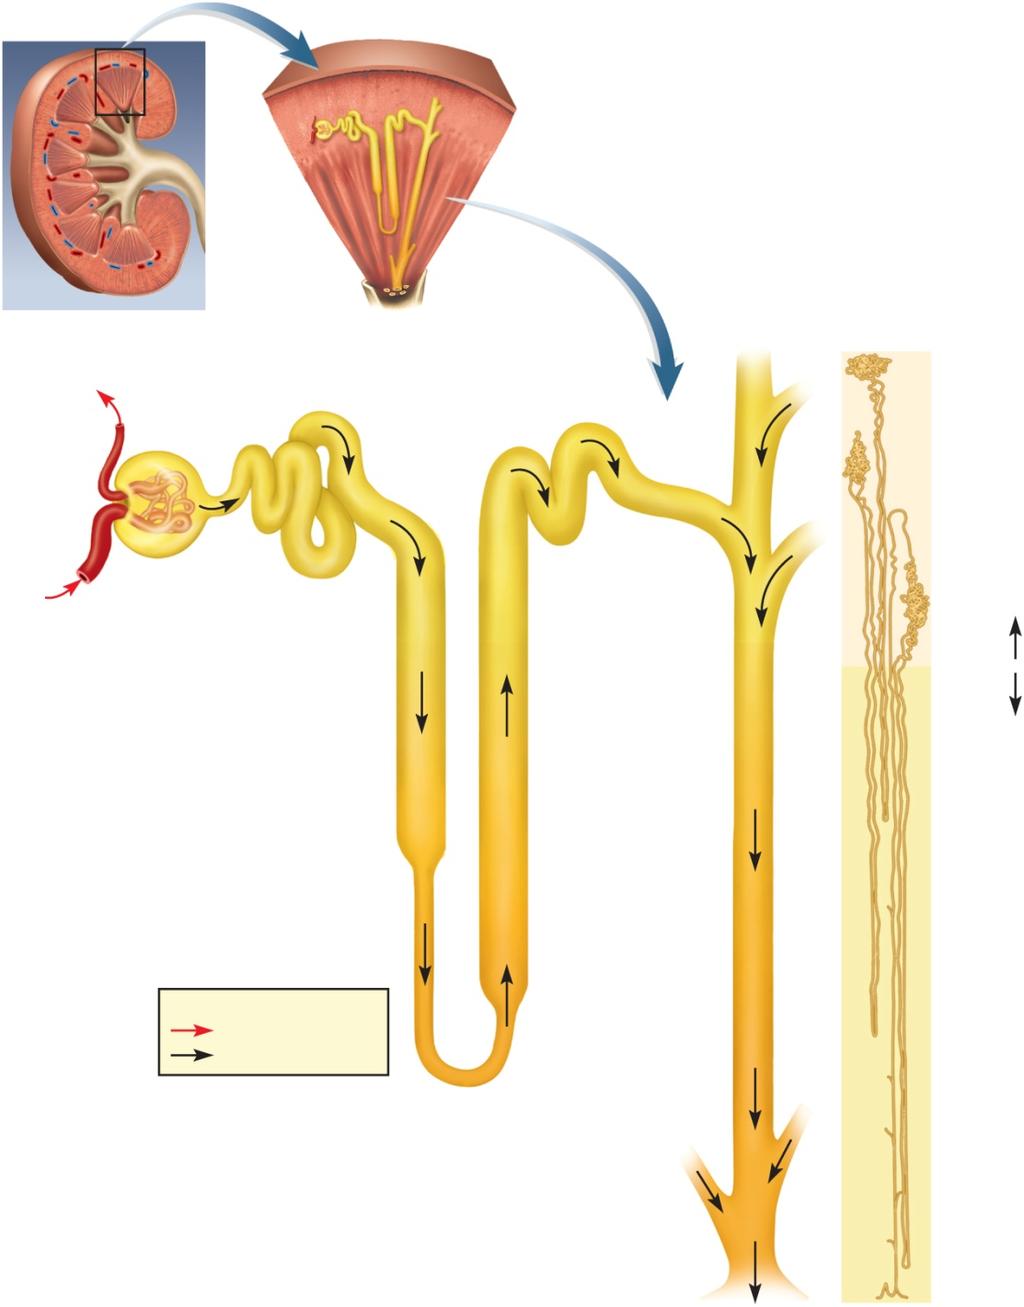 The Nephron Copyright The McGraw-Hill Companies, Inc. Permission required for reproduction or display.